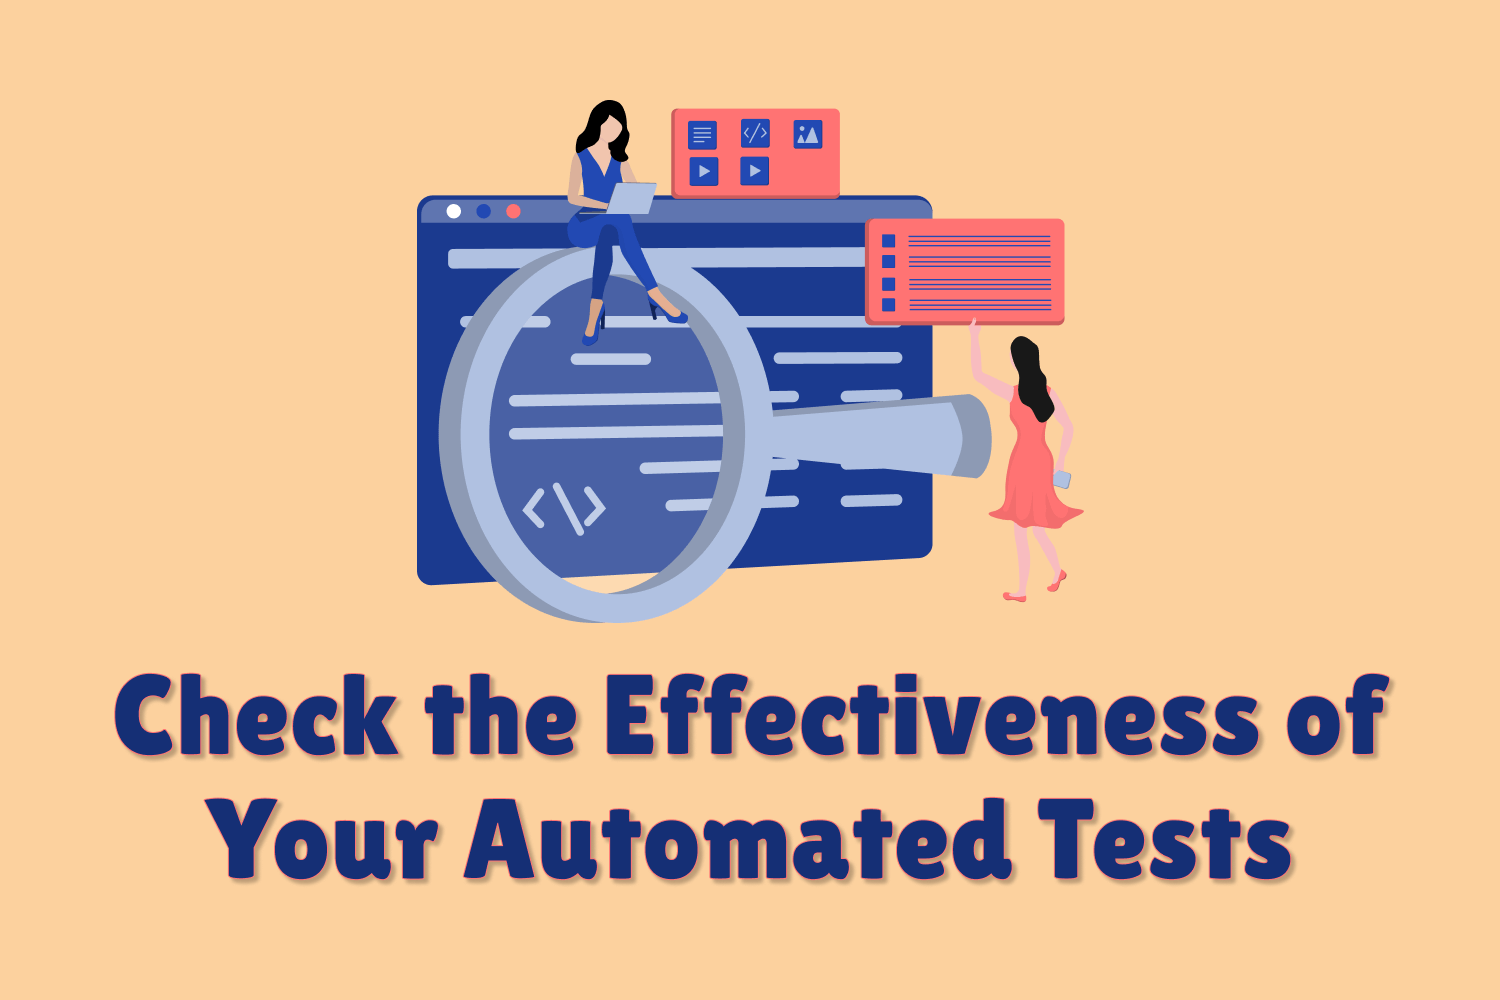 Check the Effectiveness of Your Automated Tests